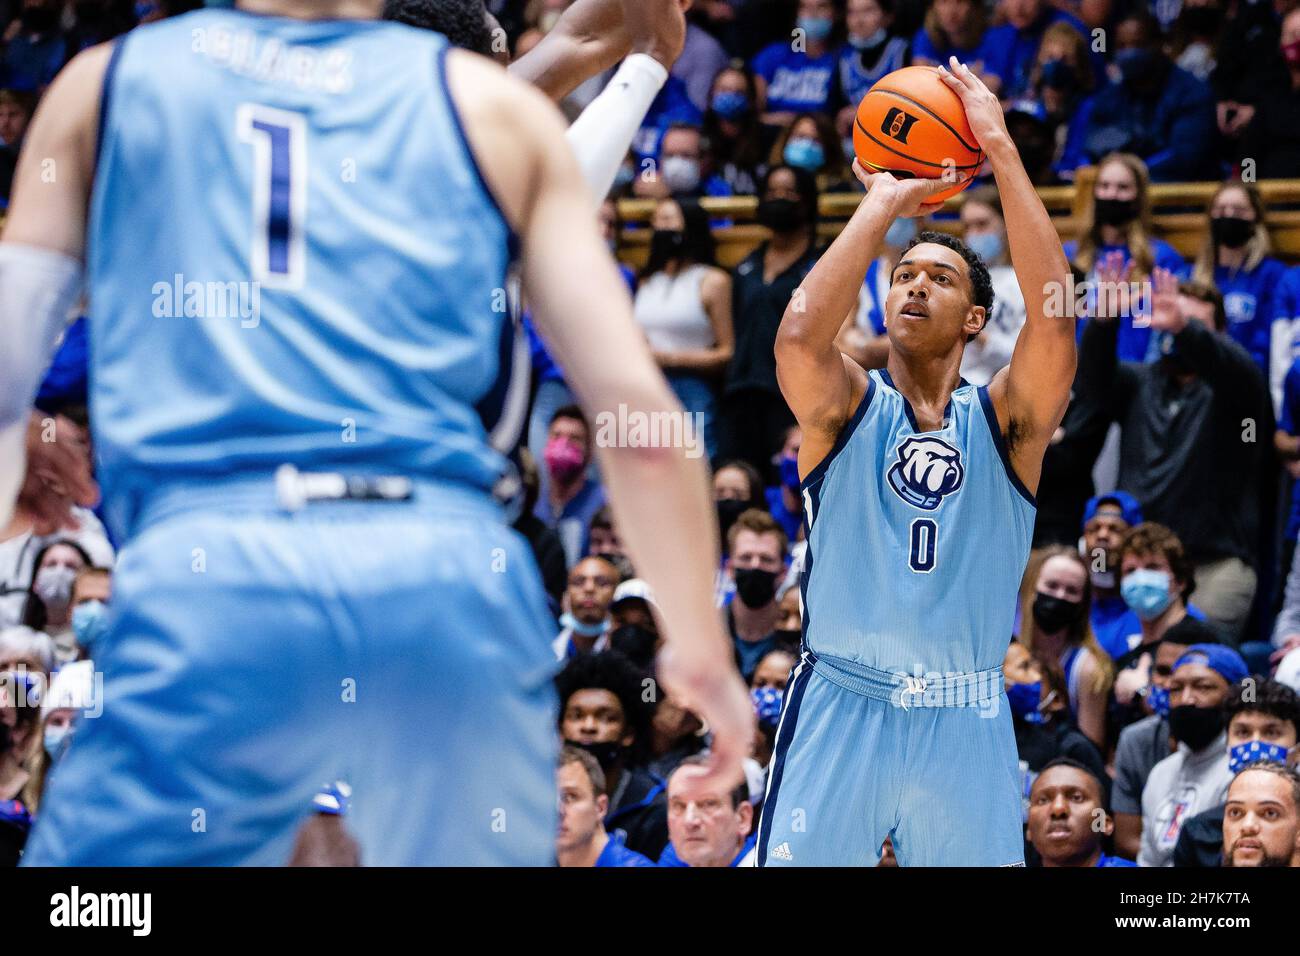 Durham, NC, USA. 22nd Nov, 2021. Citadel Bulldogs forward Jackson Price (0) shoots a three pointer against the Duke Blue Devils during the first half of the NCAA basketball matchup at Cameron Indoor in Durham, NC. (Scott Kinser/Cal Sport Media). Credit: csm/Alamy Live News Stock Photo